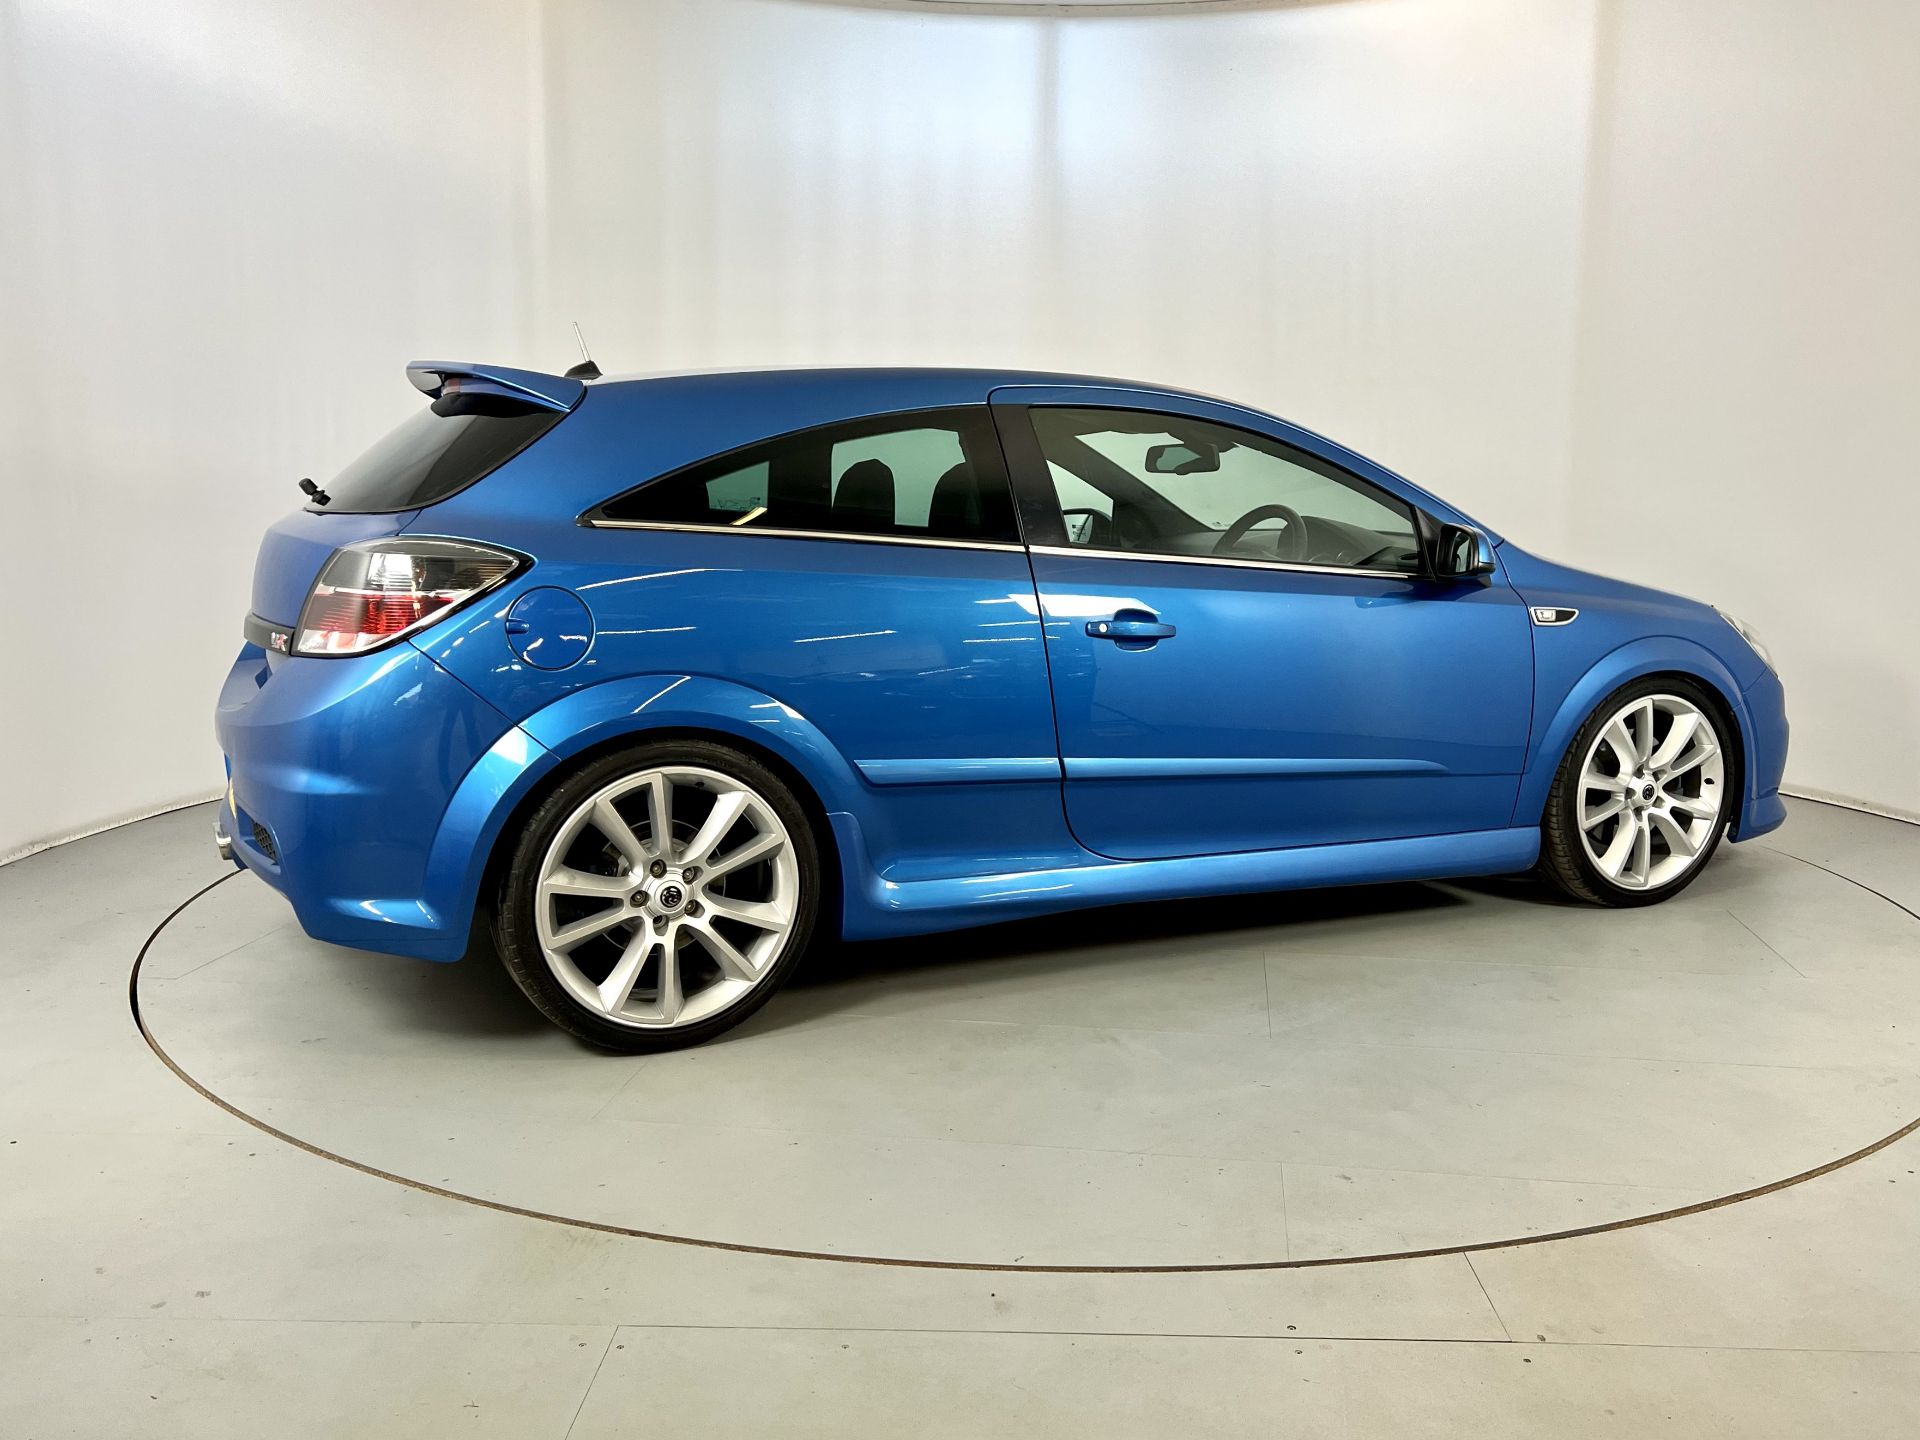 Vauxhall Astra VXR - Image 10 of 30